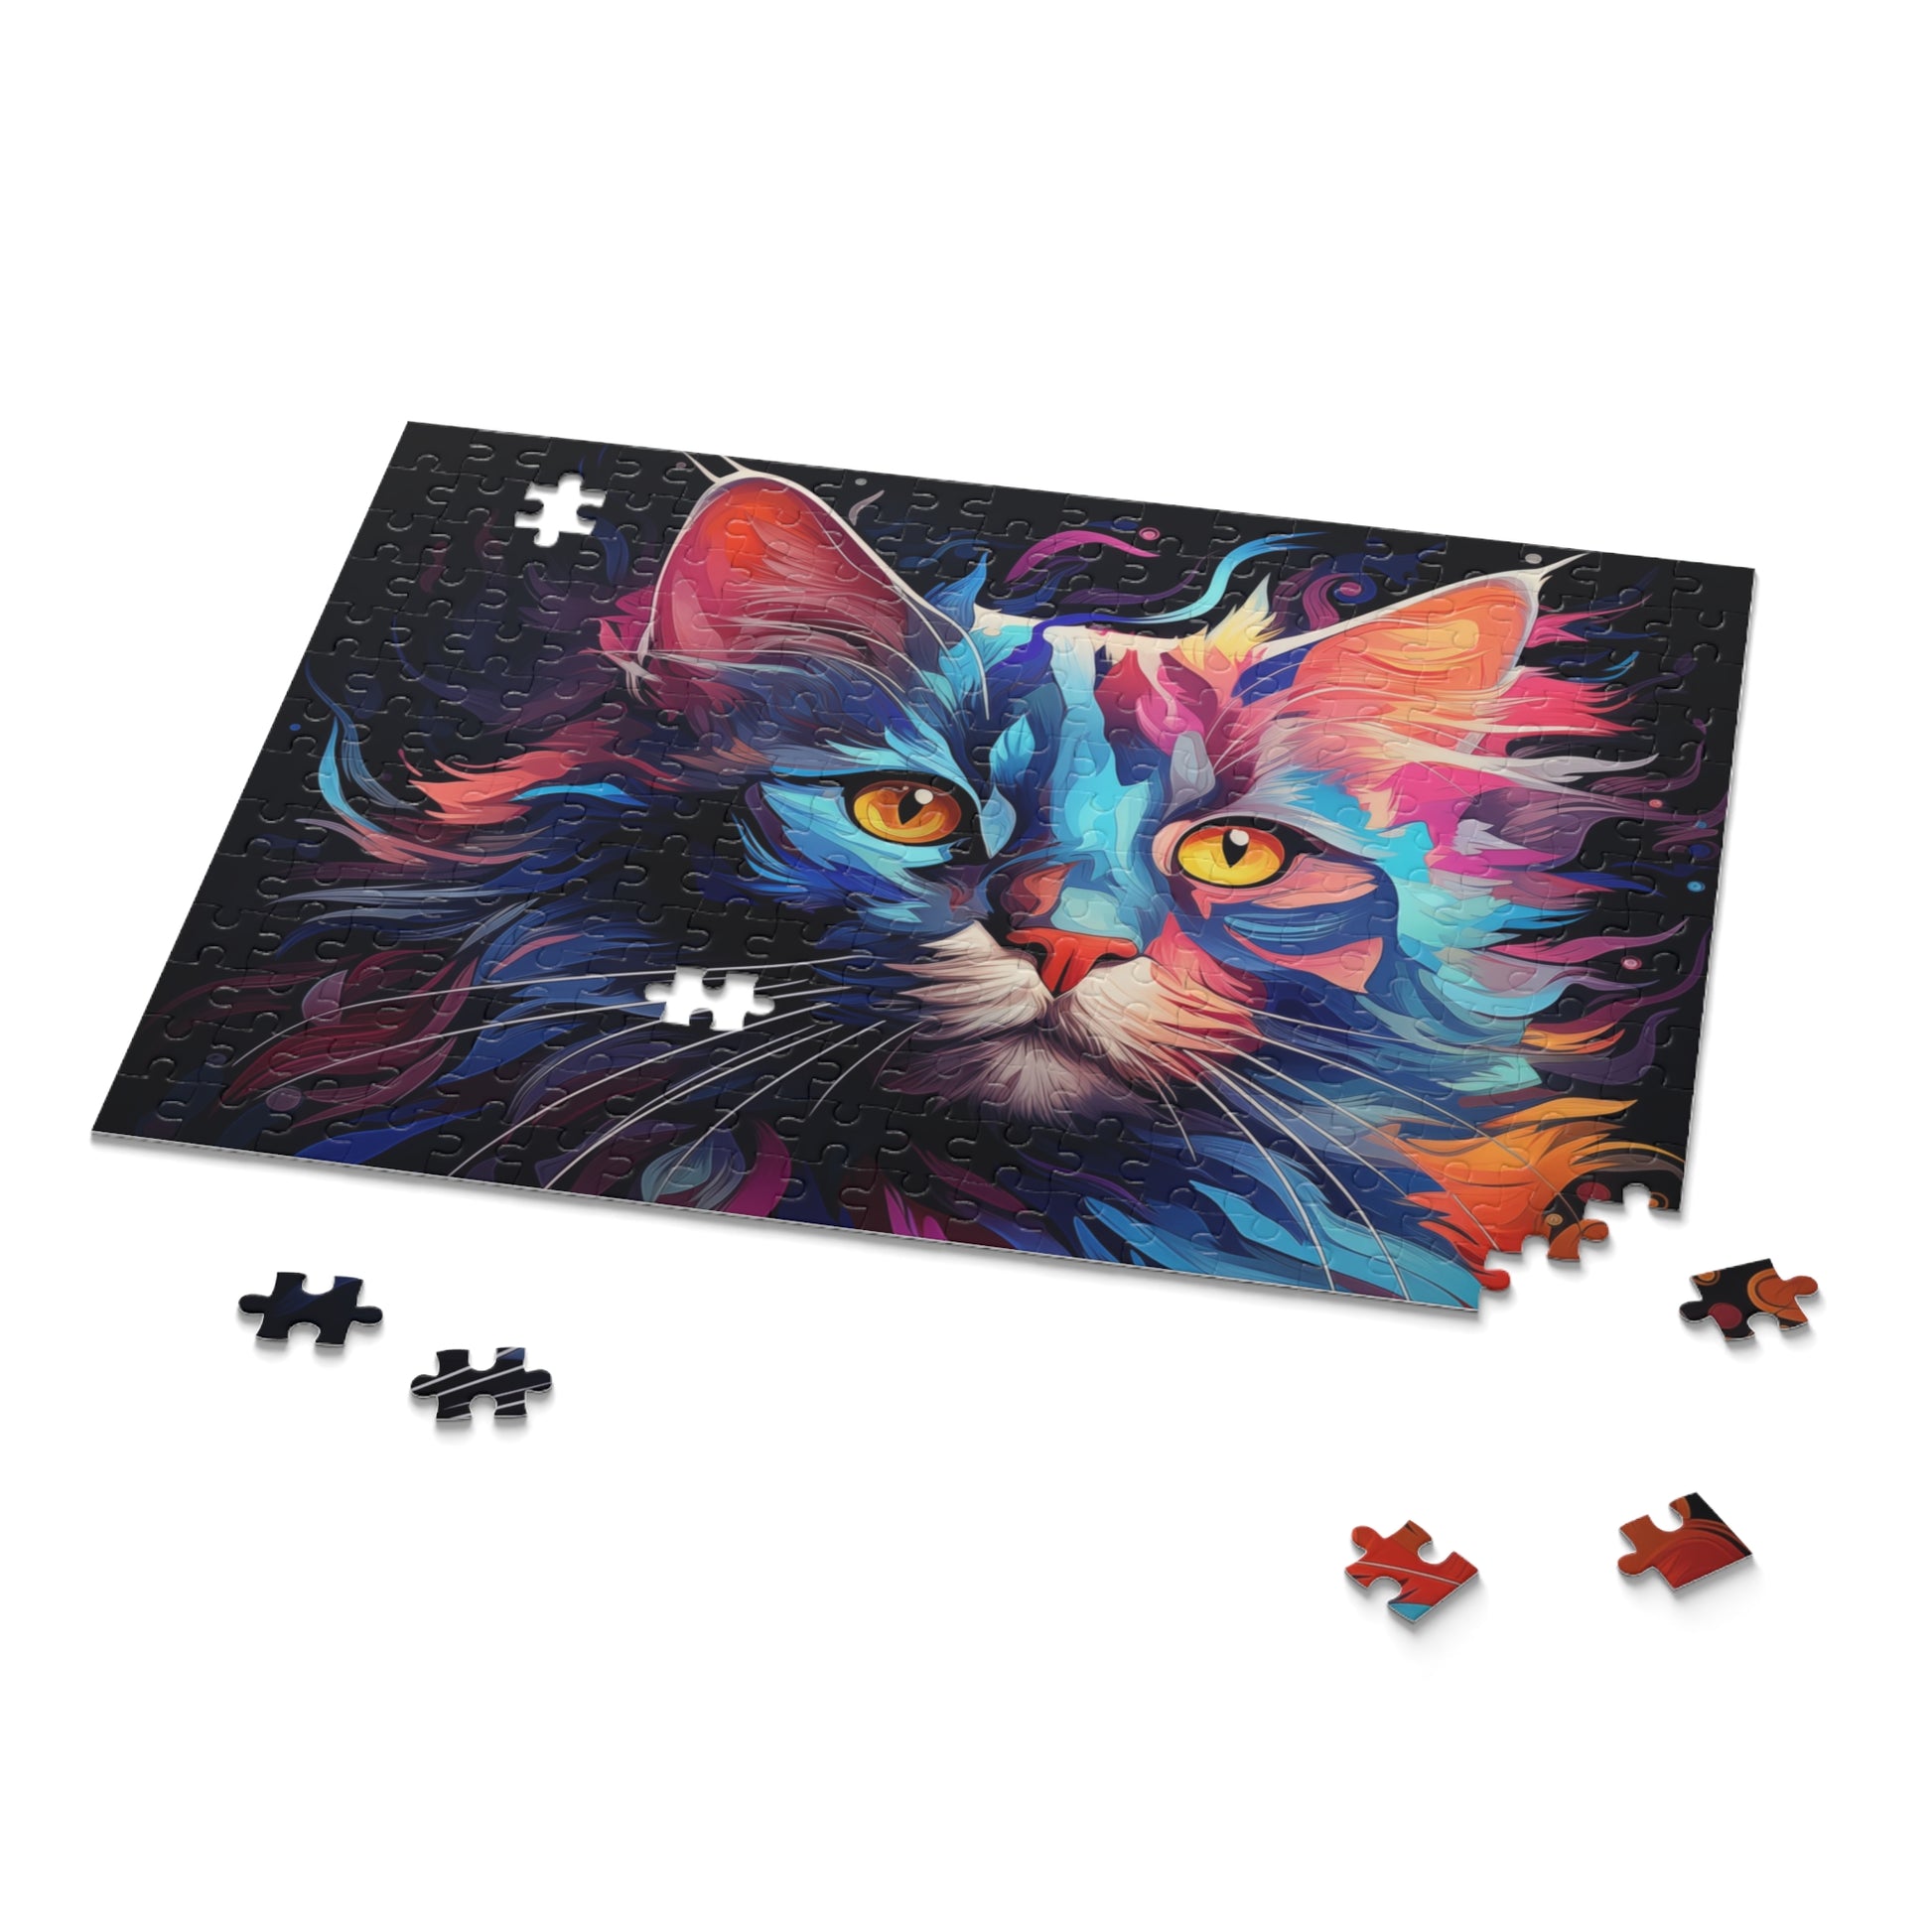 Copy of Abstract Cat Oil Paint Jigsaw Puzzle Adult Birthday Business Jigsaw Puzzle Gift for Him Funny Humorous Indoor Outdoor Game Gift For Her Online-9